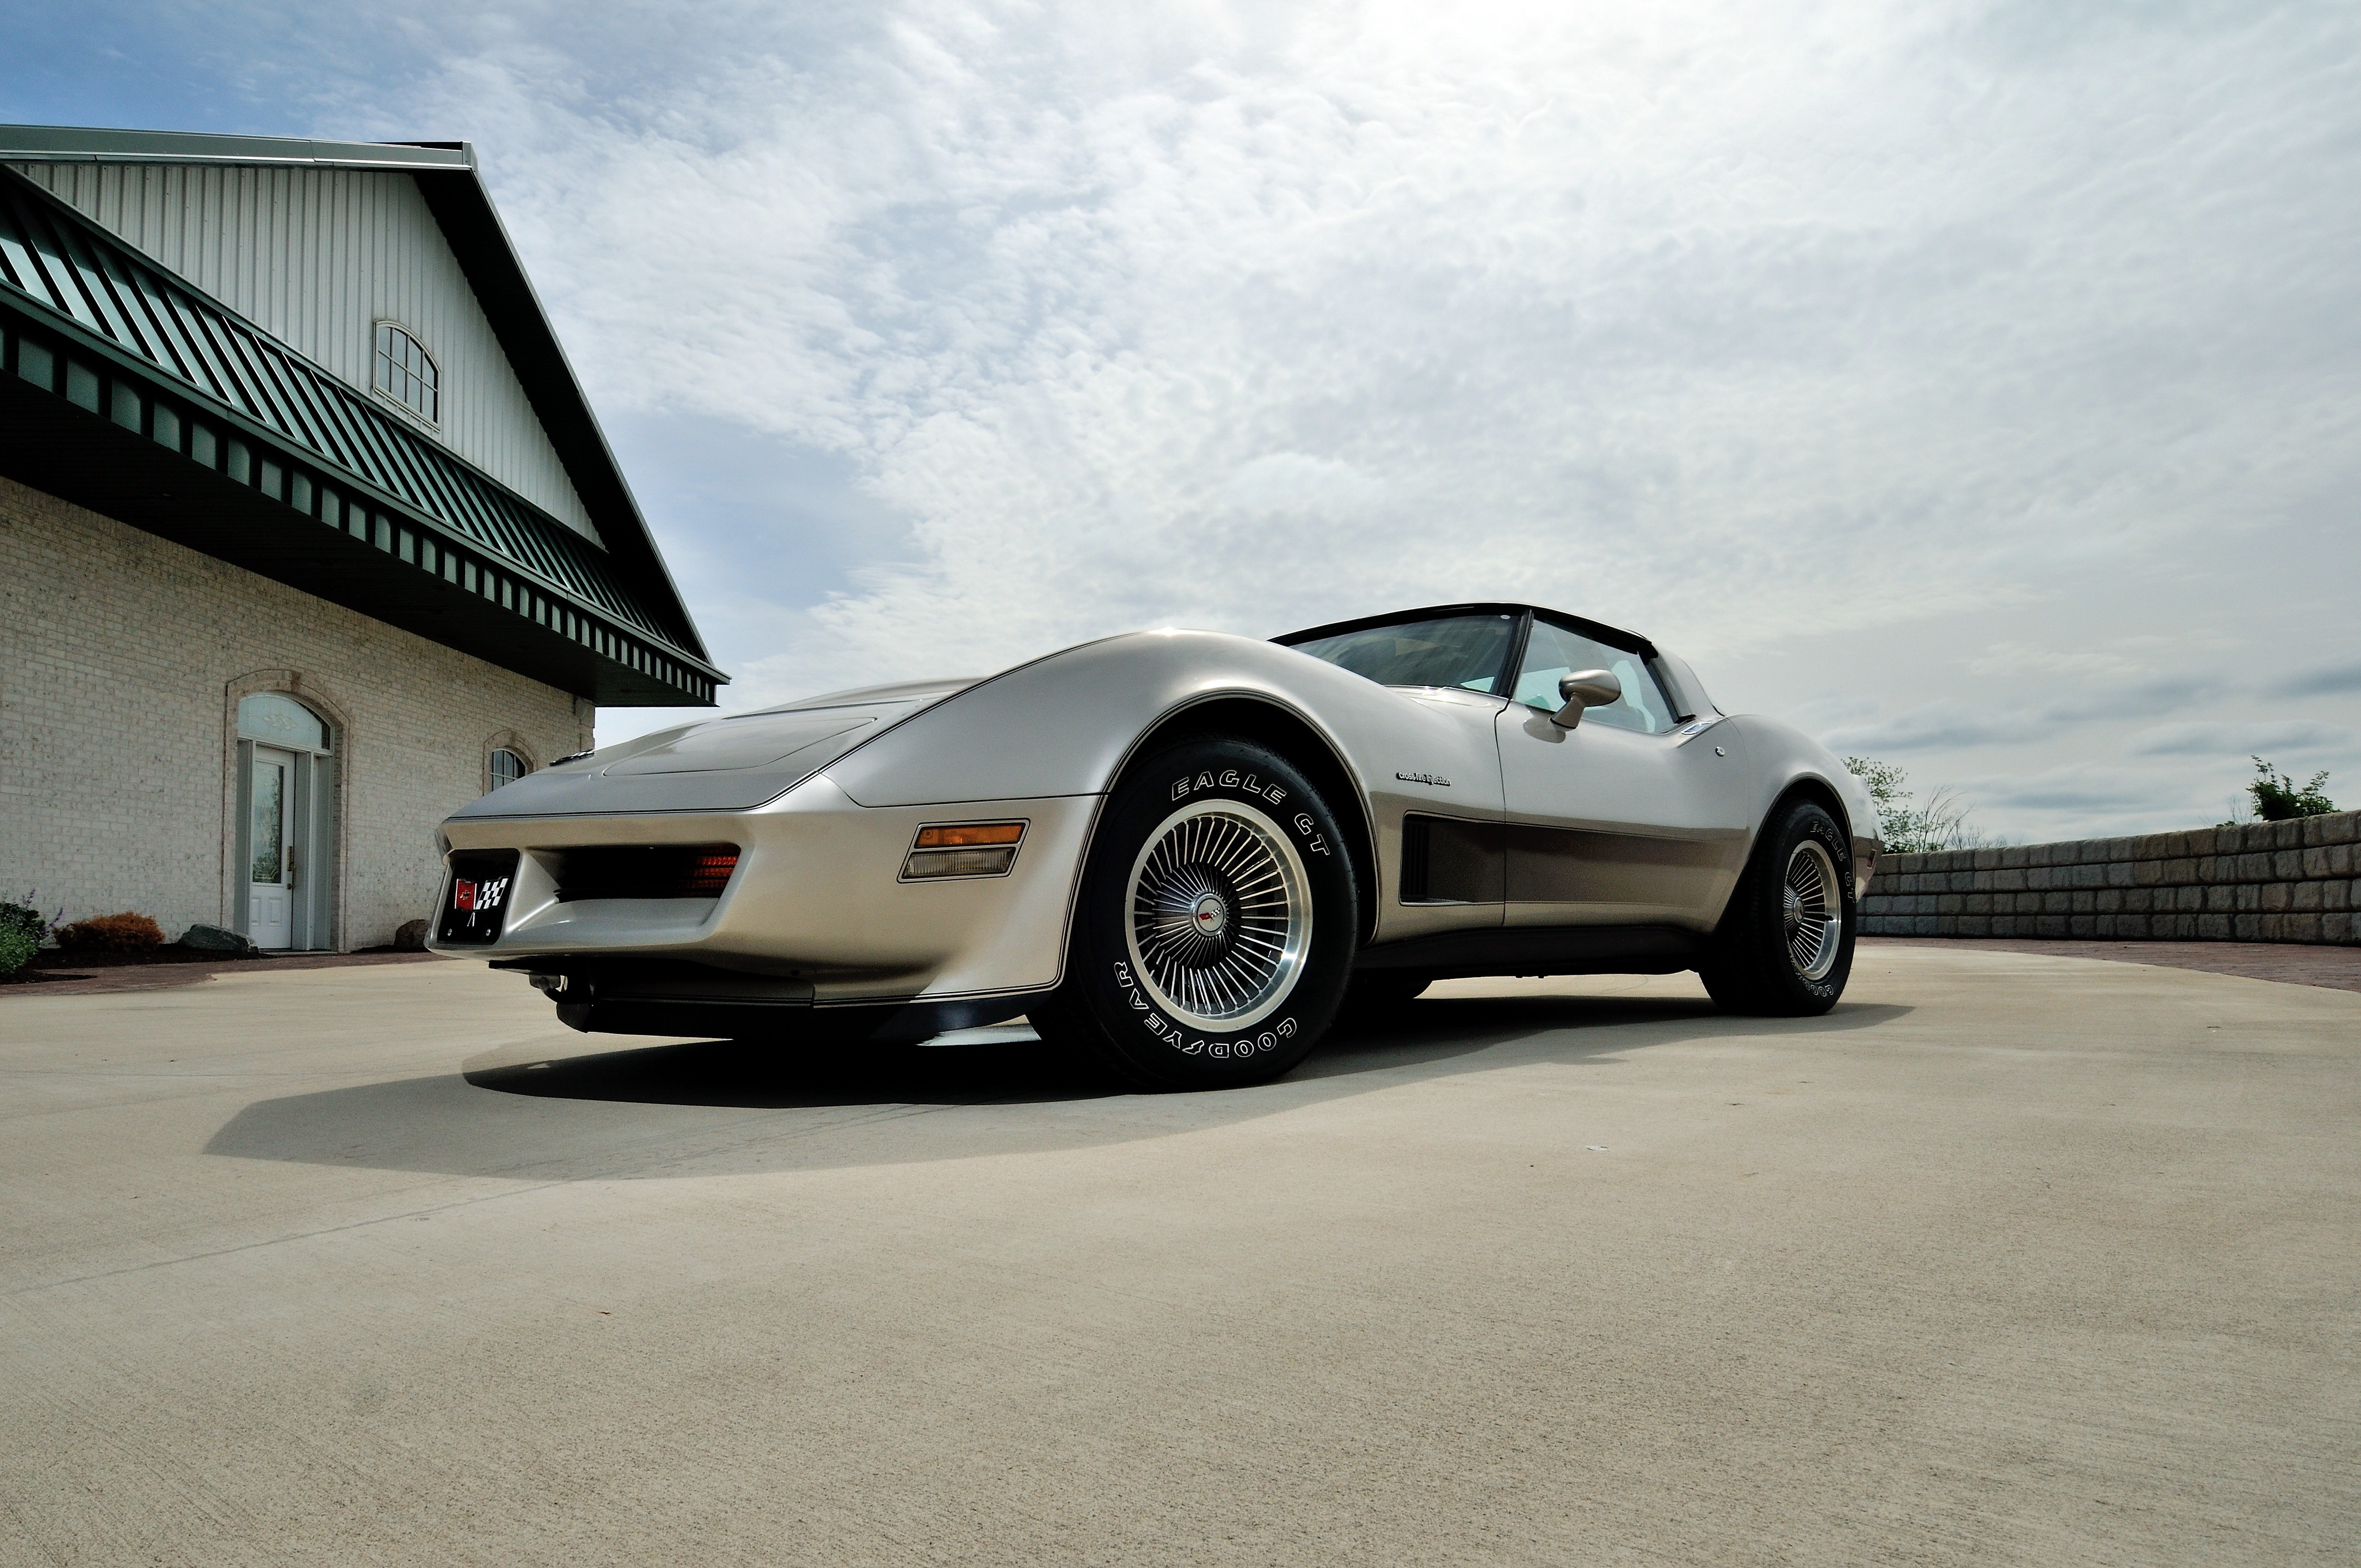 side view, corvette, cars, chevrolet, silver, silvery, 1982